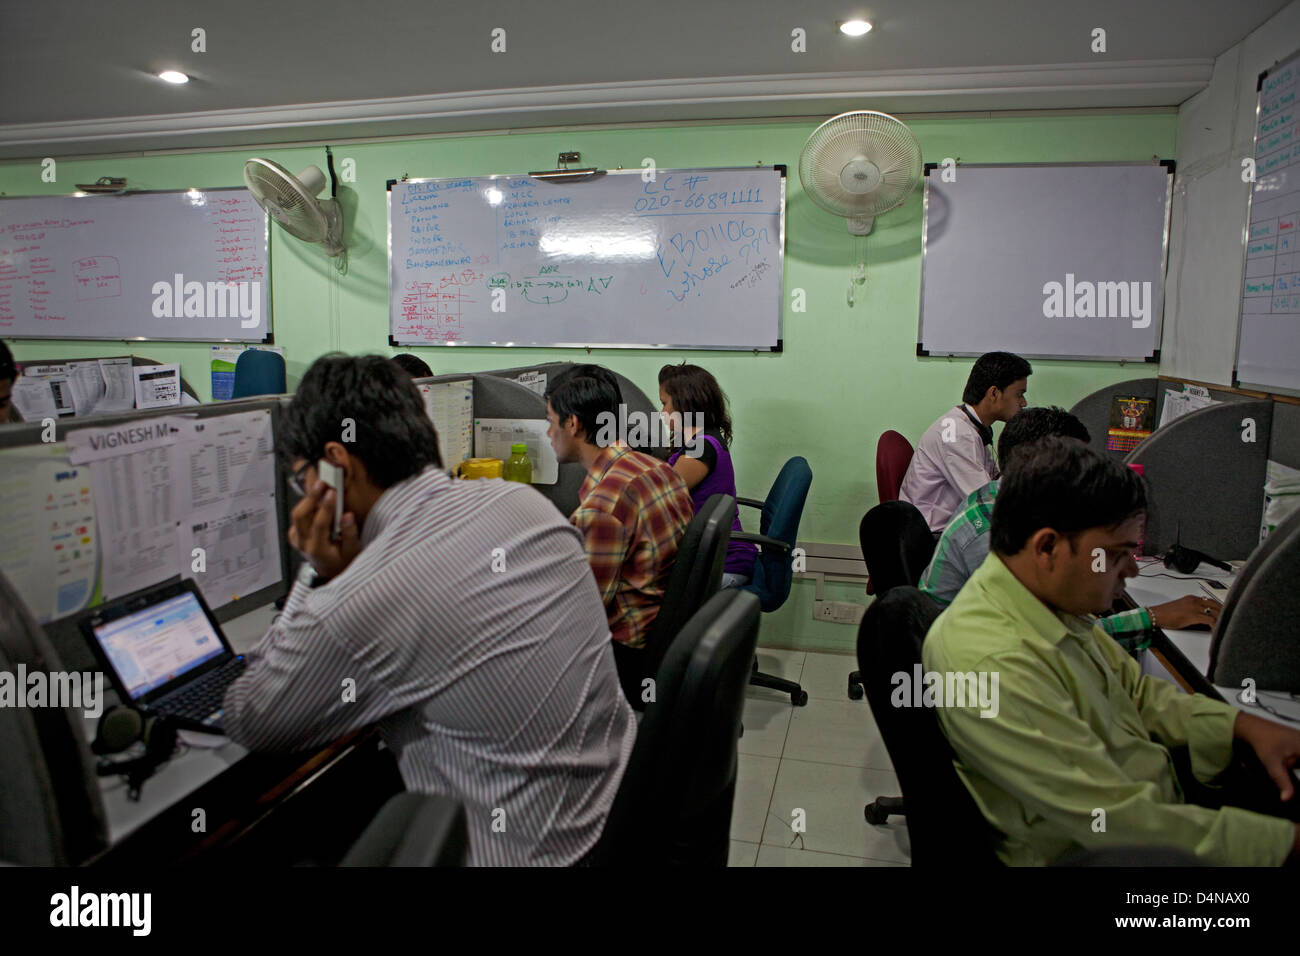 inside an Indian call-centre office, Stock Photo